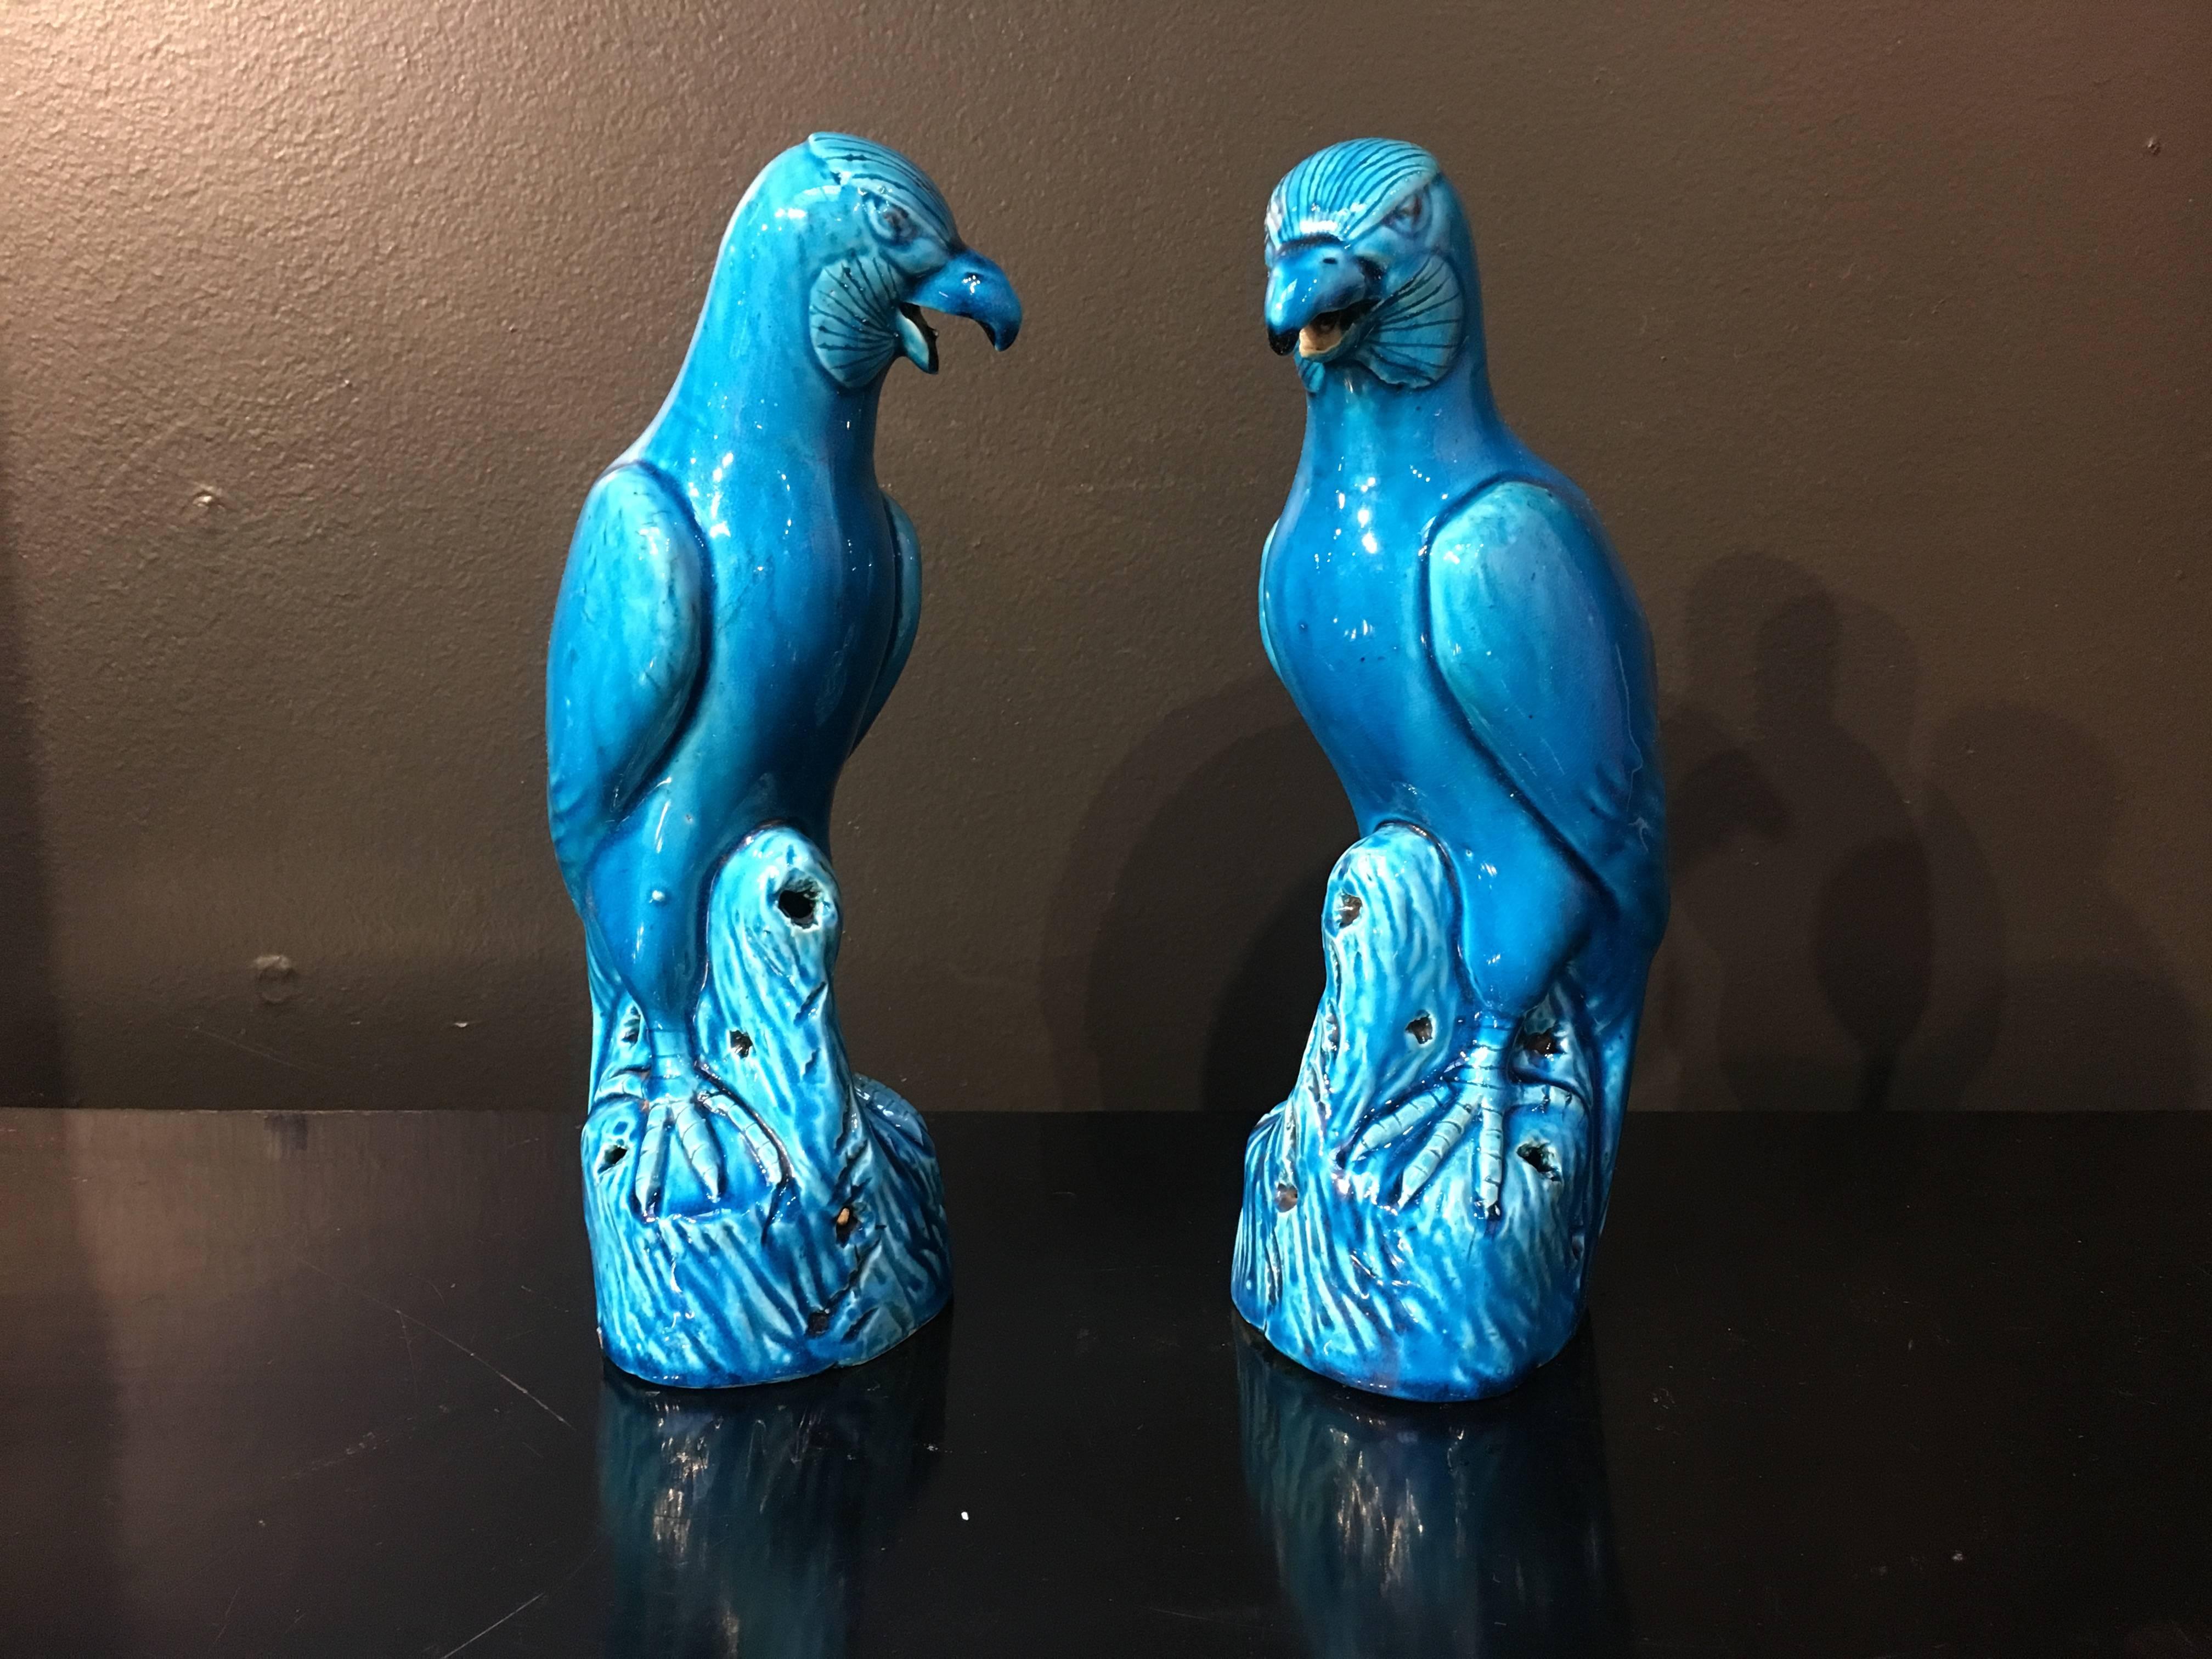 A wonderful pair of Chinese export turquoise glazed porcelain models of hawks, Qing Dynasty, late 19th century, China. 

The fierce birds of prey are well modeled and portrayed perched upon rocky outcrops with their heads slightly turned staring